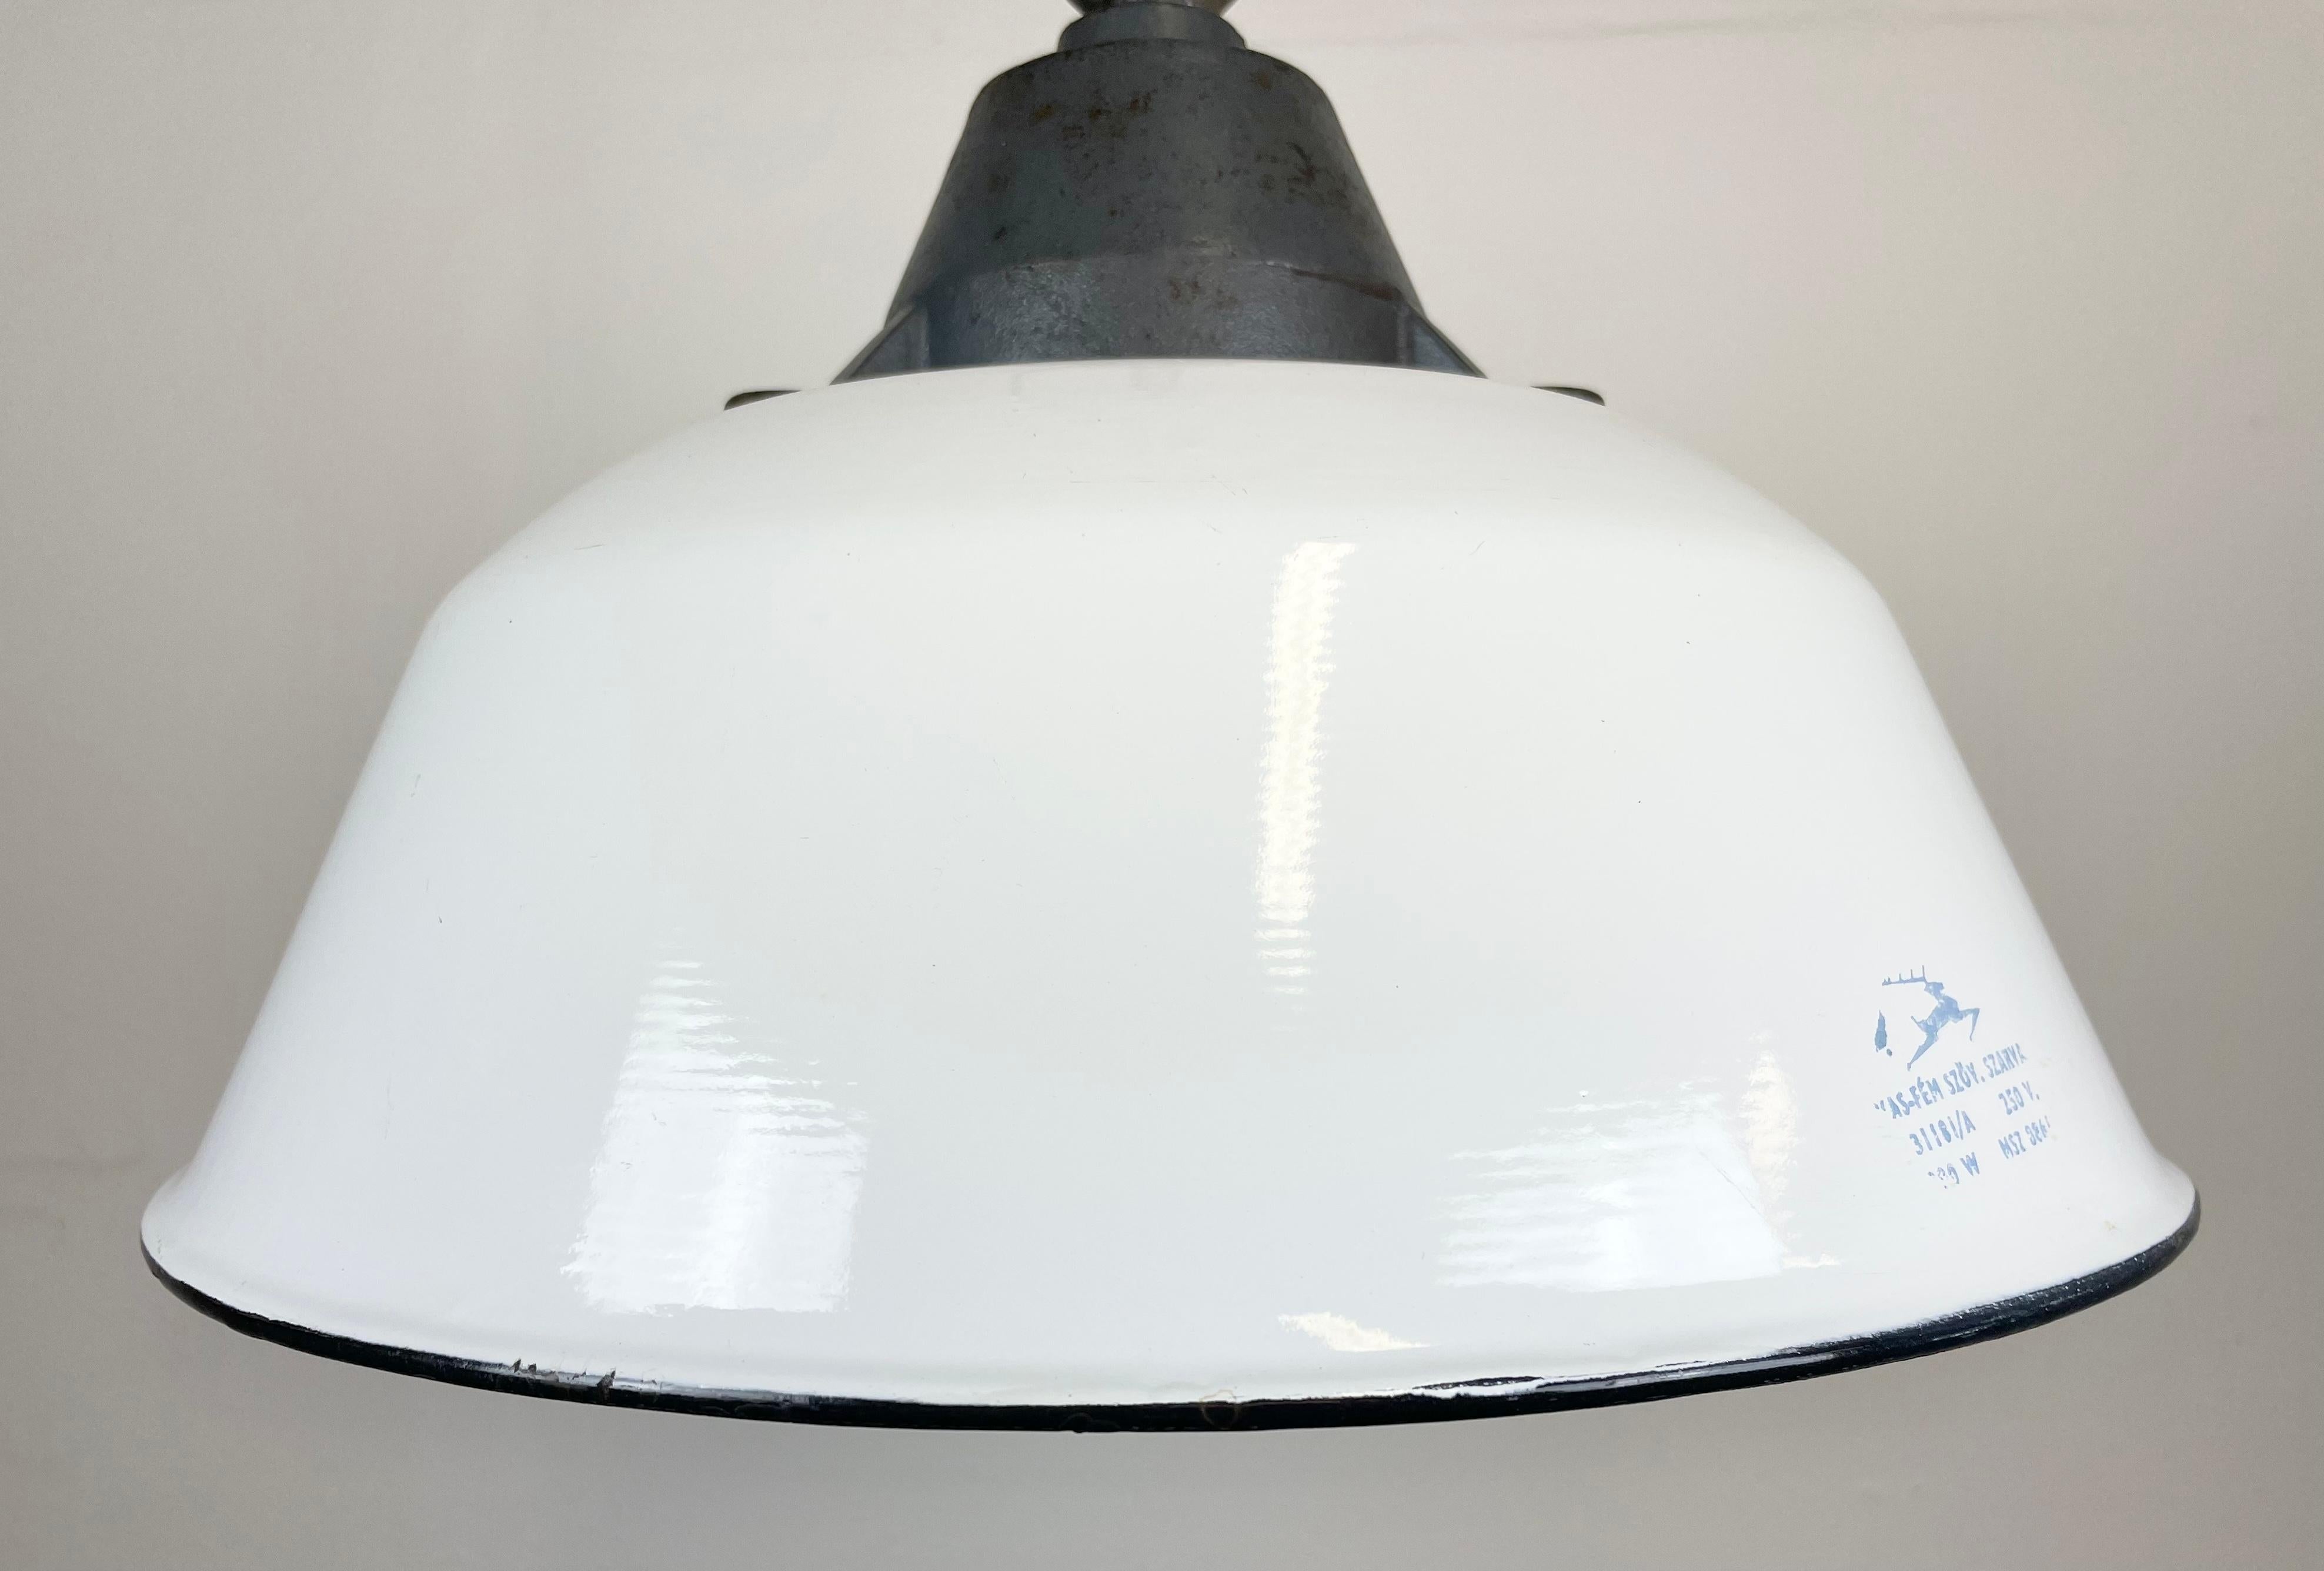 Hungarian White Enamel and Cast Iron Industrial Pendant Light with Glass Cover, 1960s For Sale